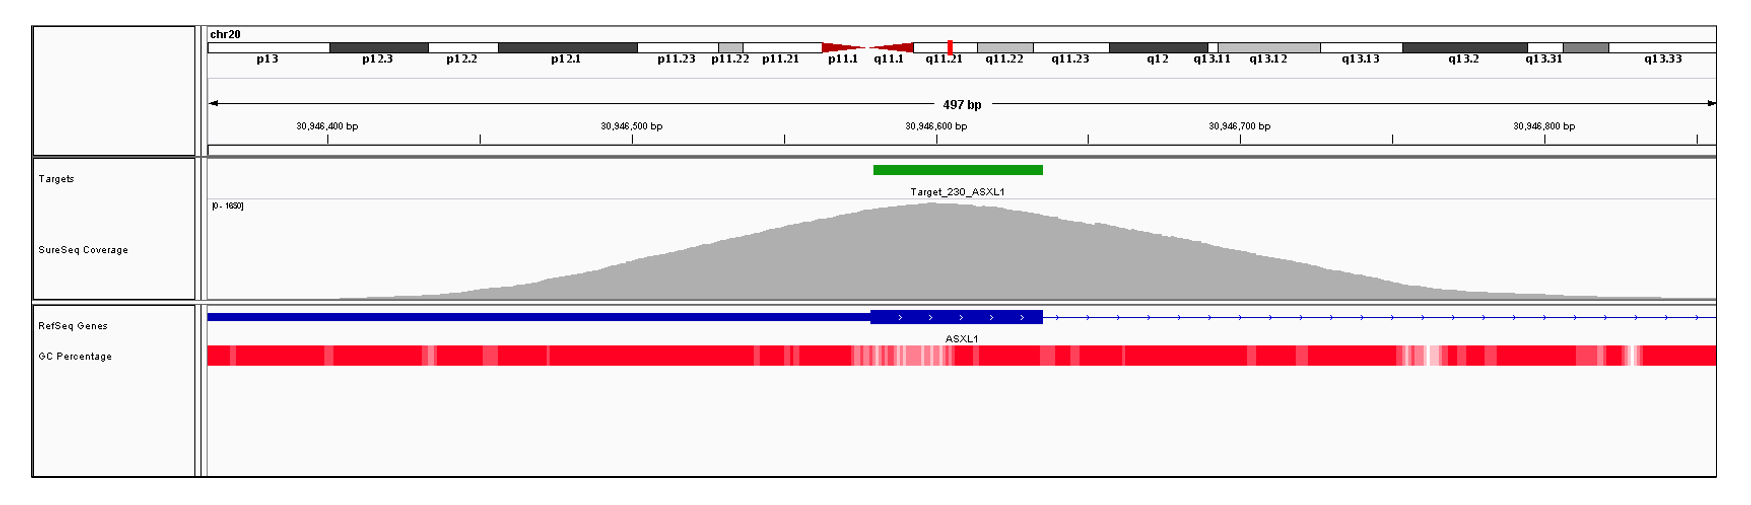 ASXL1 Exon 1 (hg19 chr20:30946147-30946635). Depth of coverage per base (grey). Targeted region (green). Gene coding region as defined by RefSeq (blue). GC percentage (red). Image